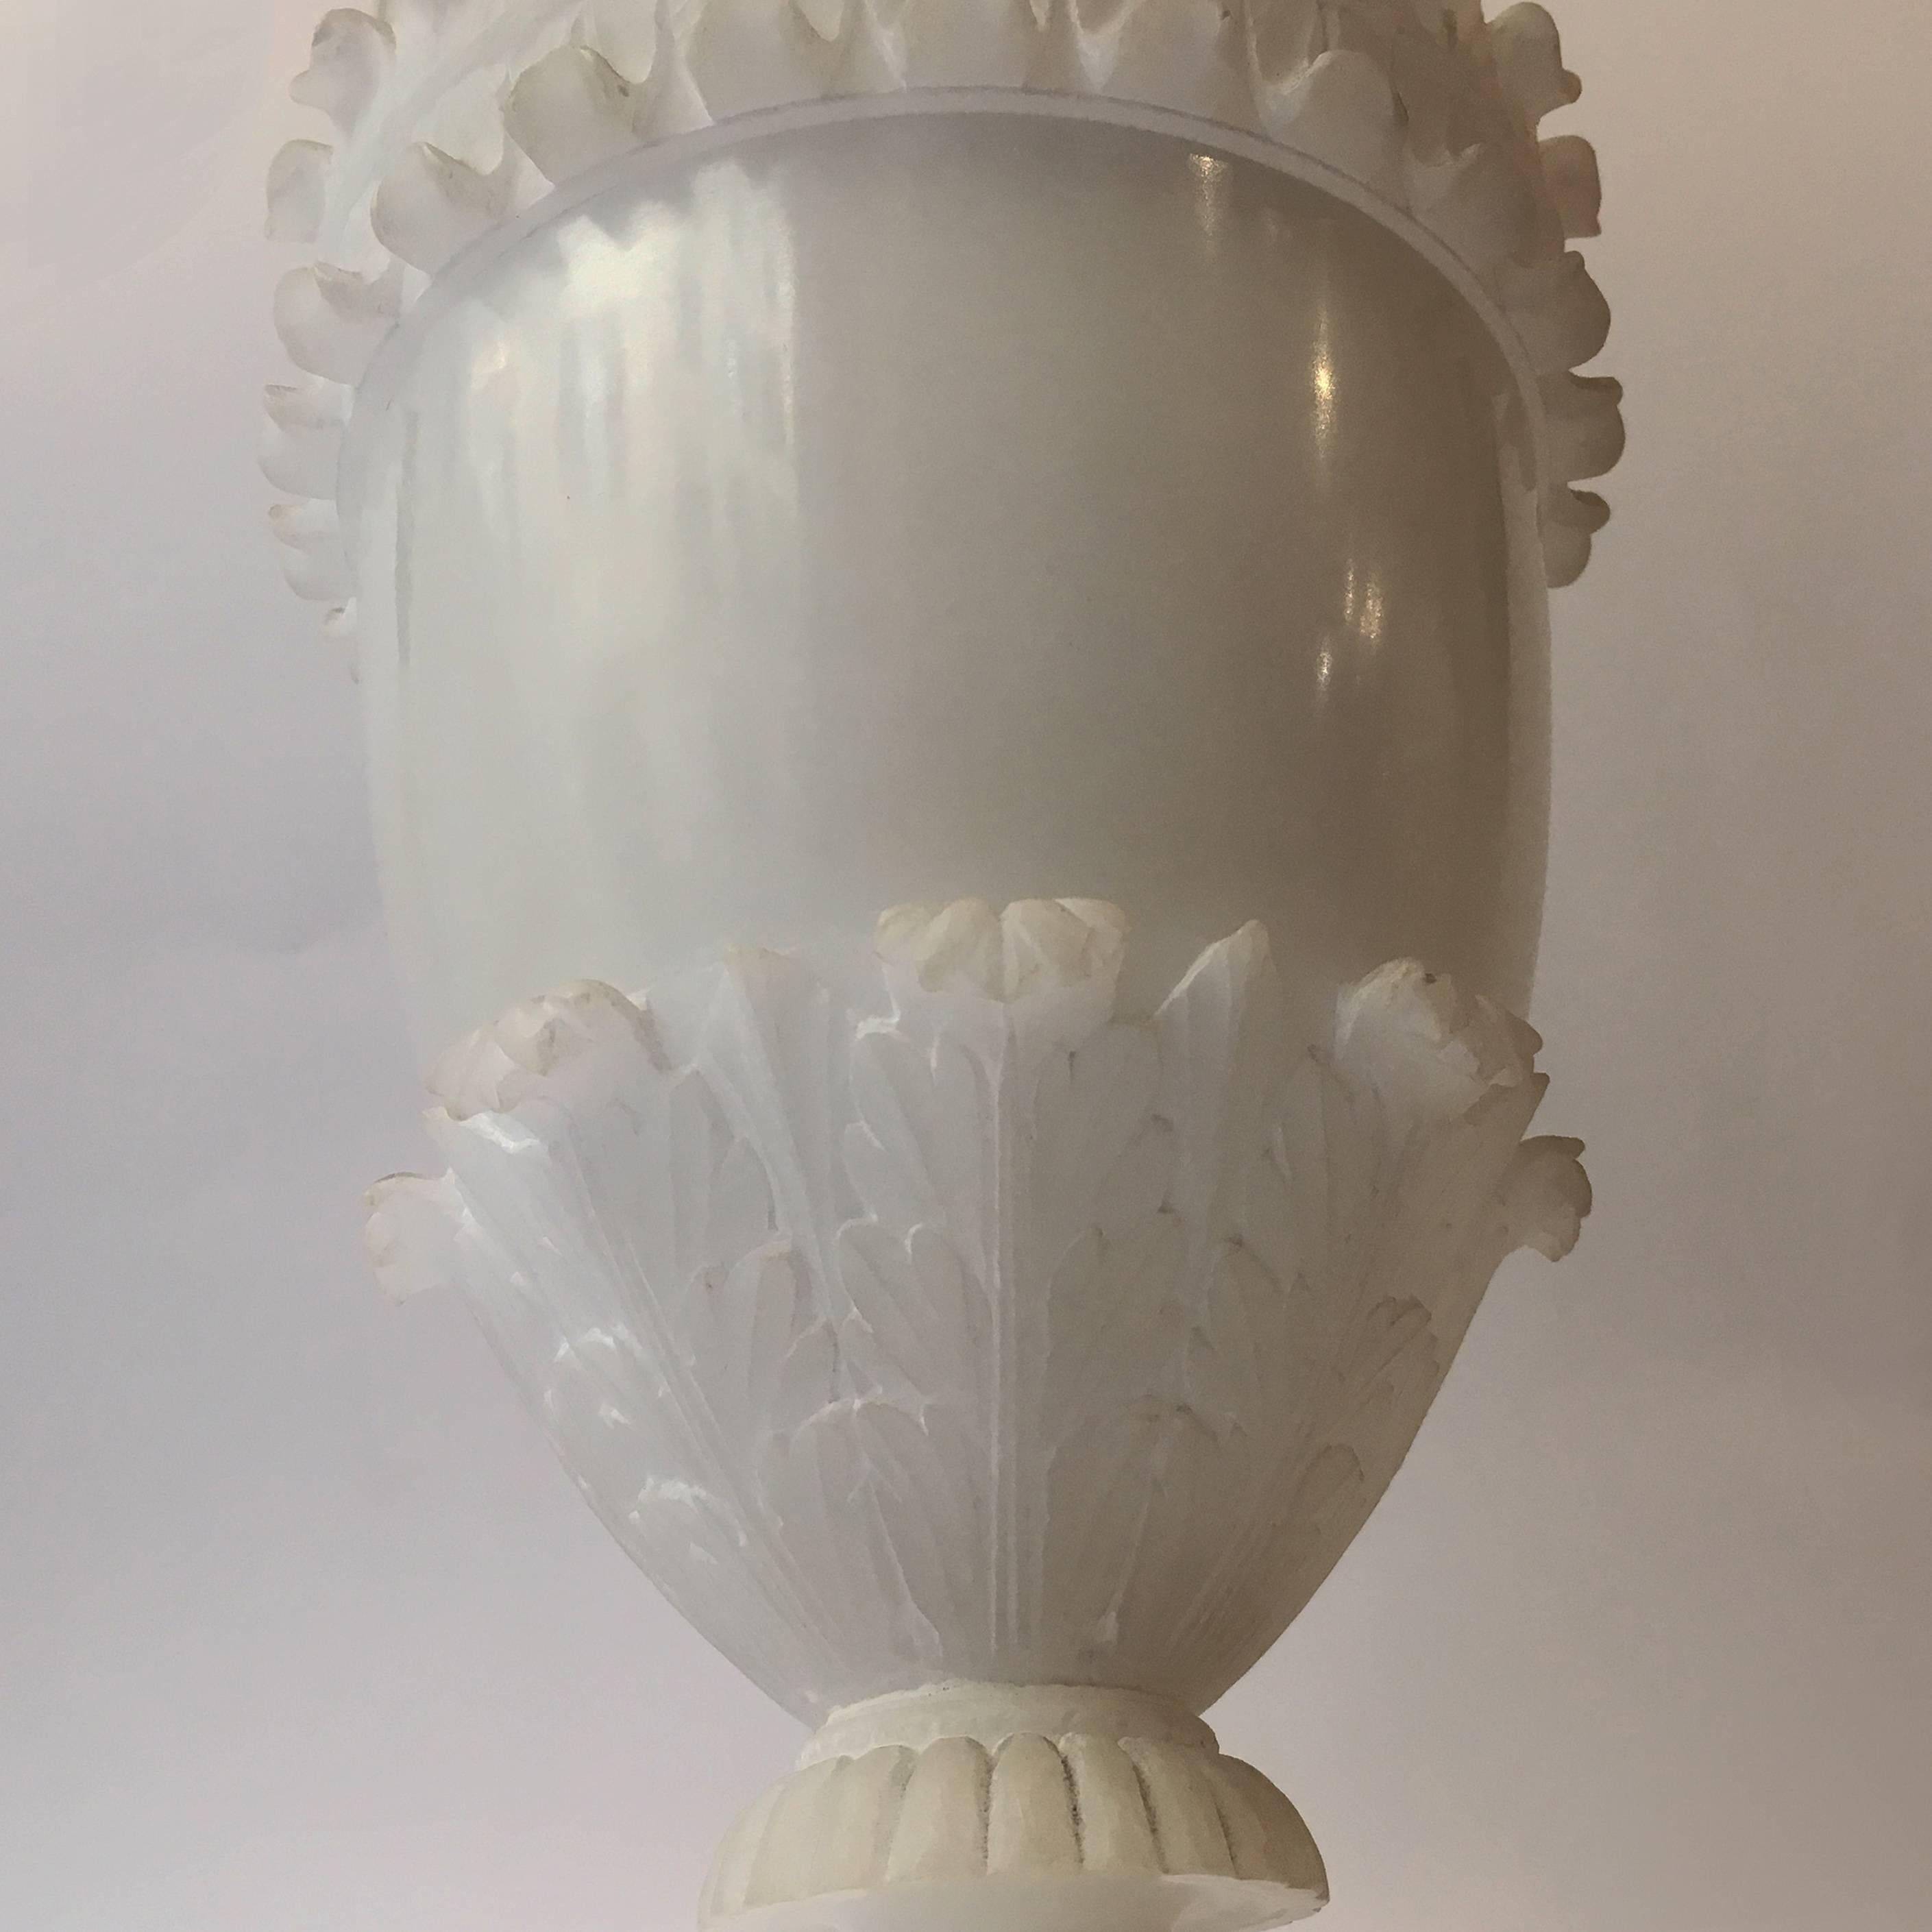 18th Century 19th Century Italian Pair of Hand-Carved Neoclassical Alabaster Vases or Urns For Sale